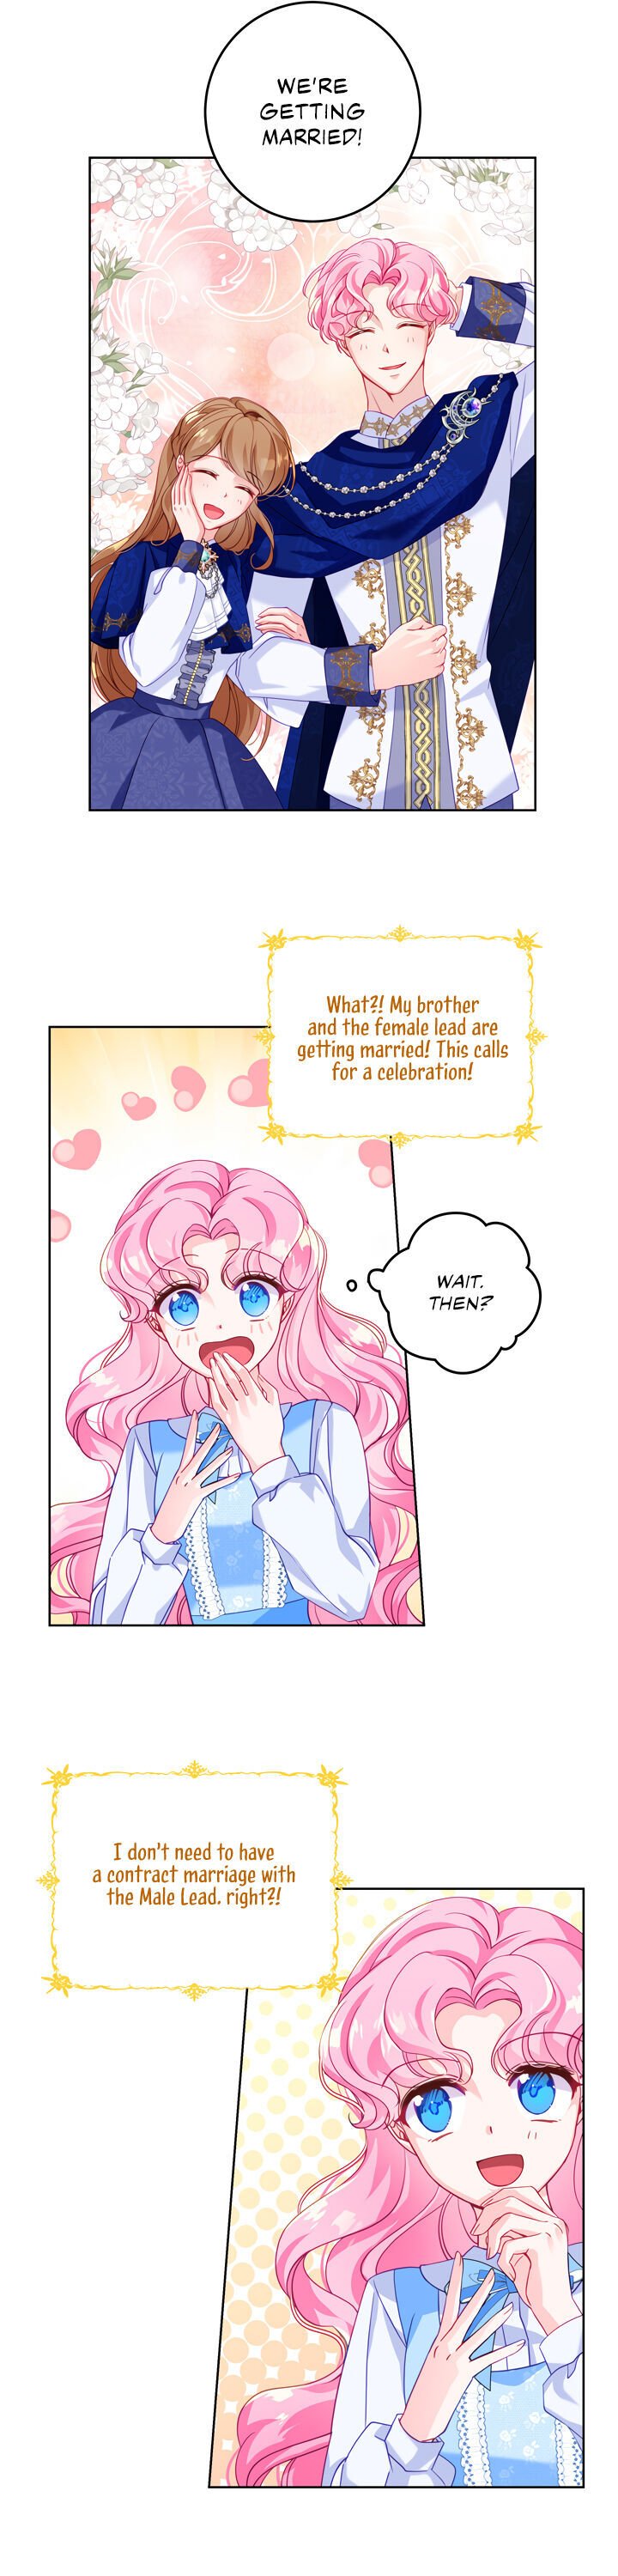 I Will Seduce the Male Lead for My Older Brother Chapter 1 - Page 6